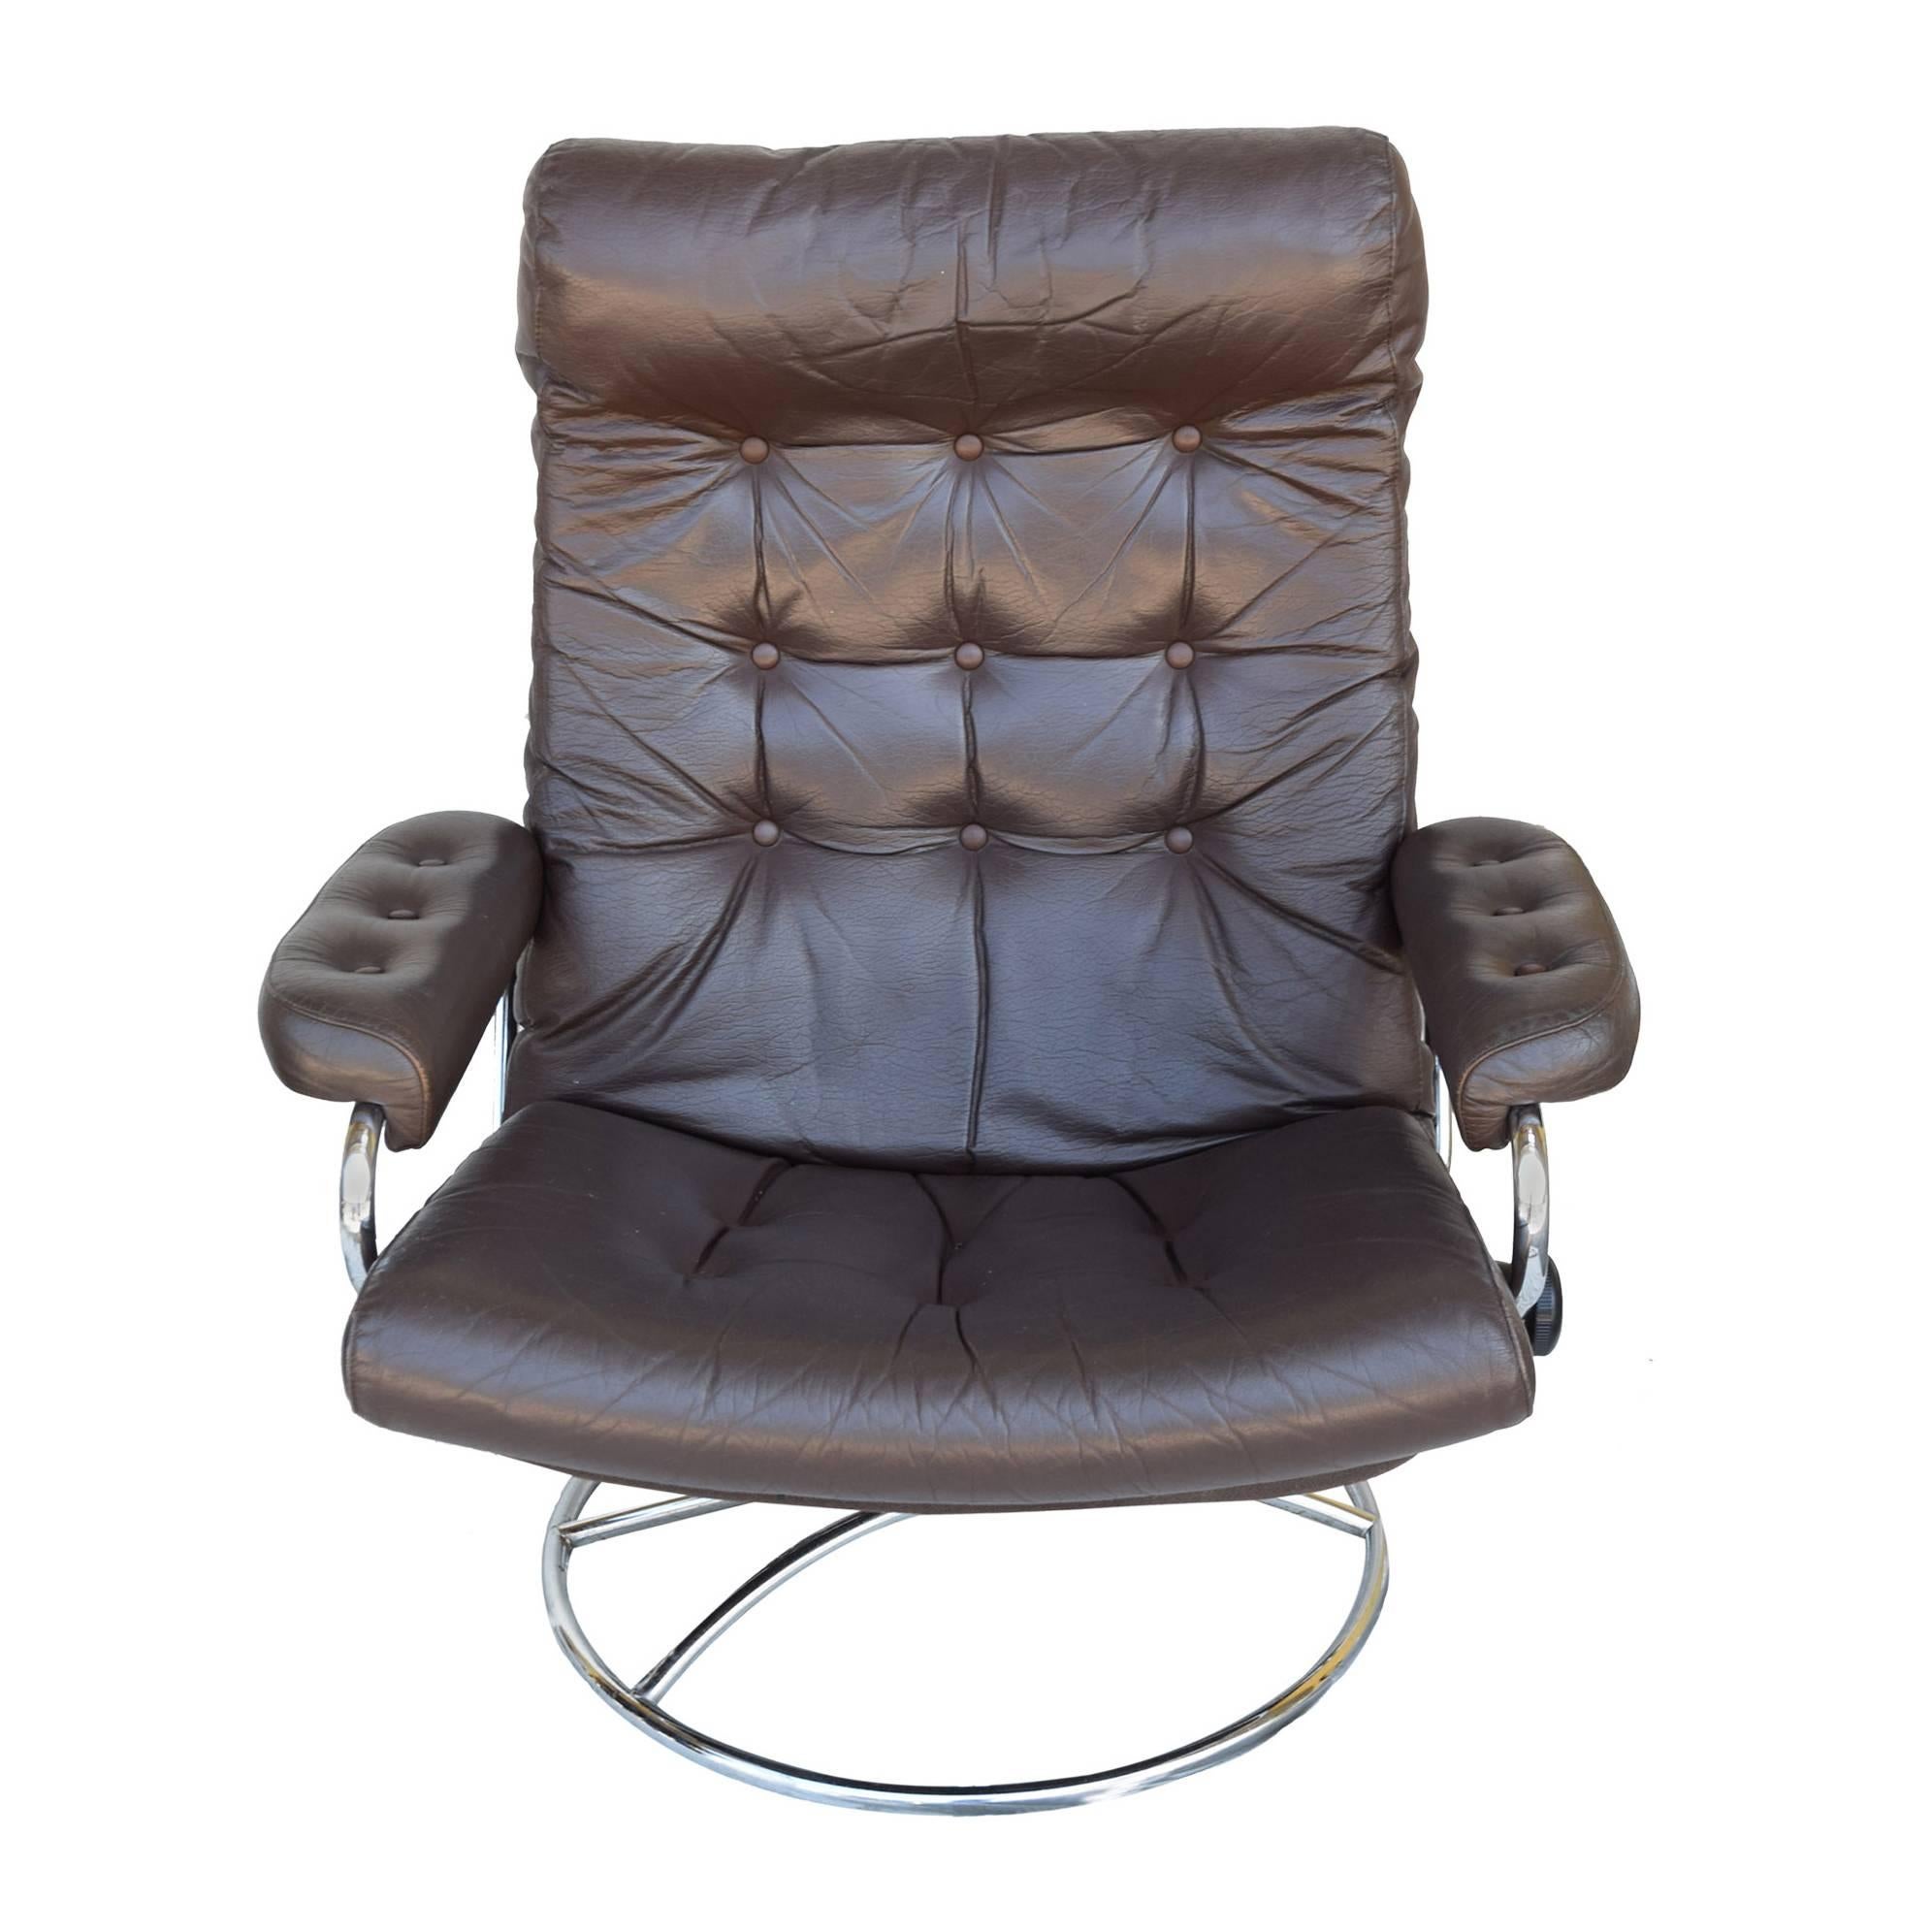 Vintage Ekornes Stressless recliner and ottoman made in Norway, circa 1972. Features button-tufted leather with roll-neck support and brown tweed fabric back around a chrome frame. Fully reclining and adjustable. Turning locking knobs on both sides